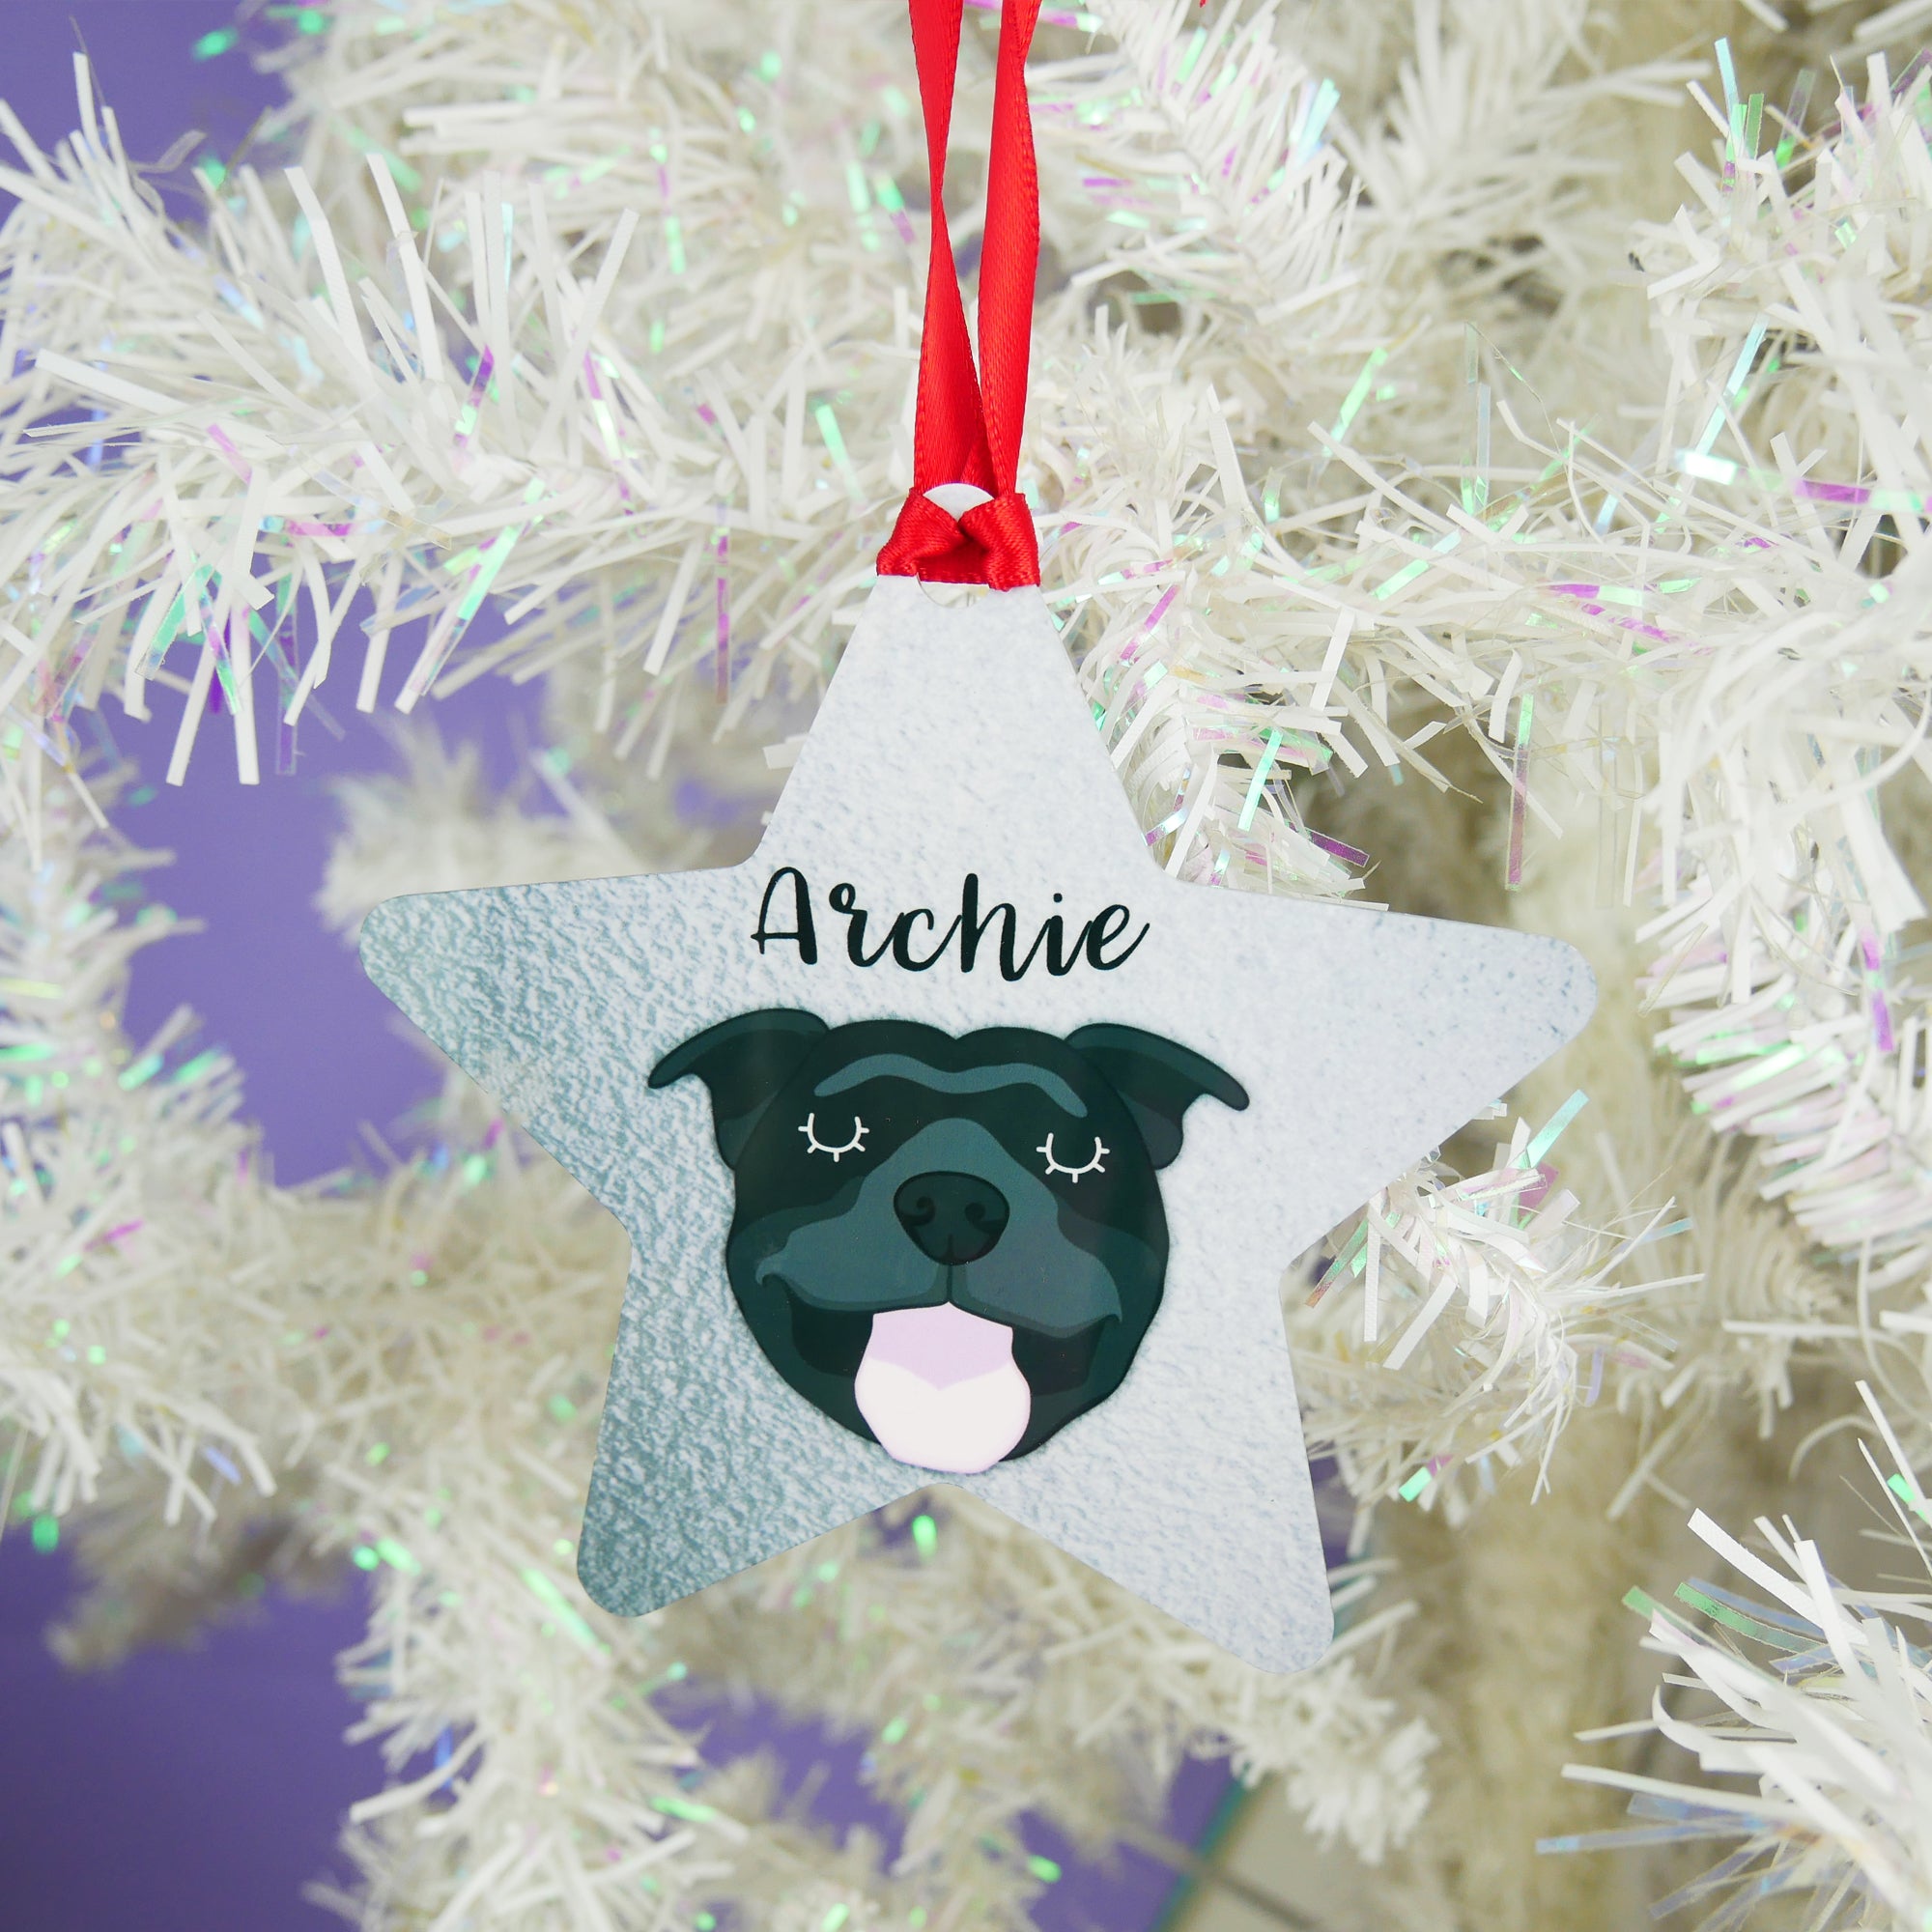 Personalised Staffie Christmas Decoration - Silver Design  - Hoobynoo - Personalised Pet Tags and Gifts